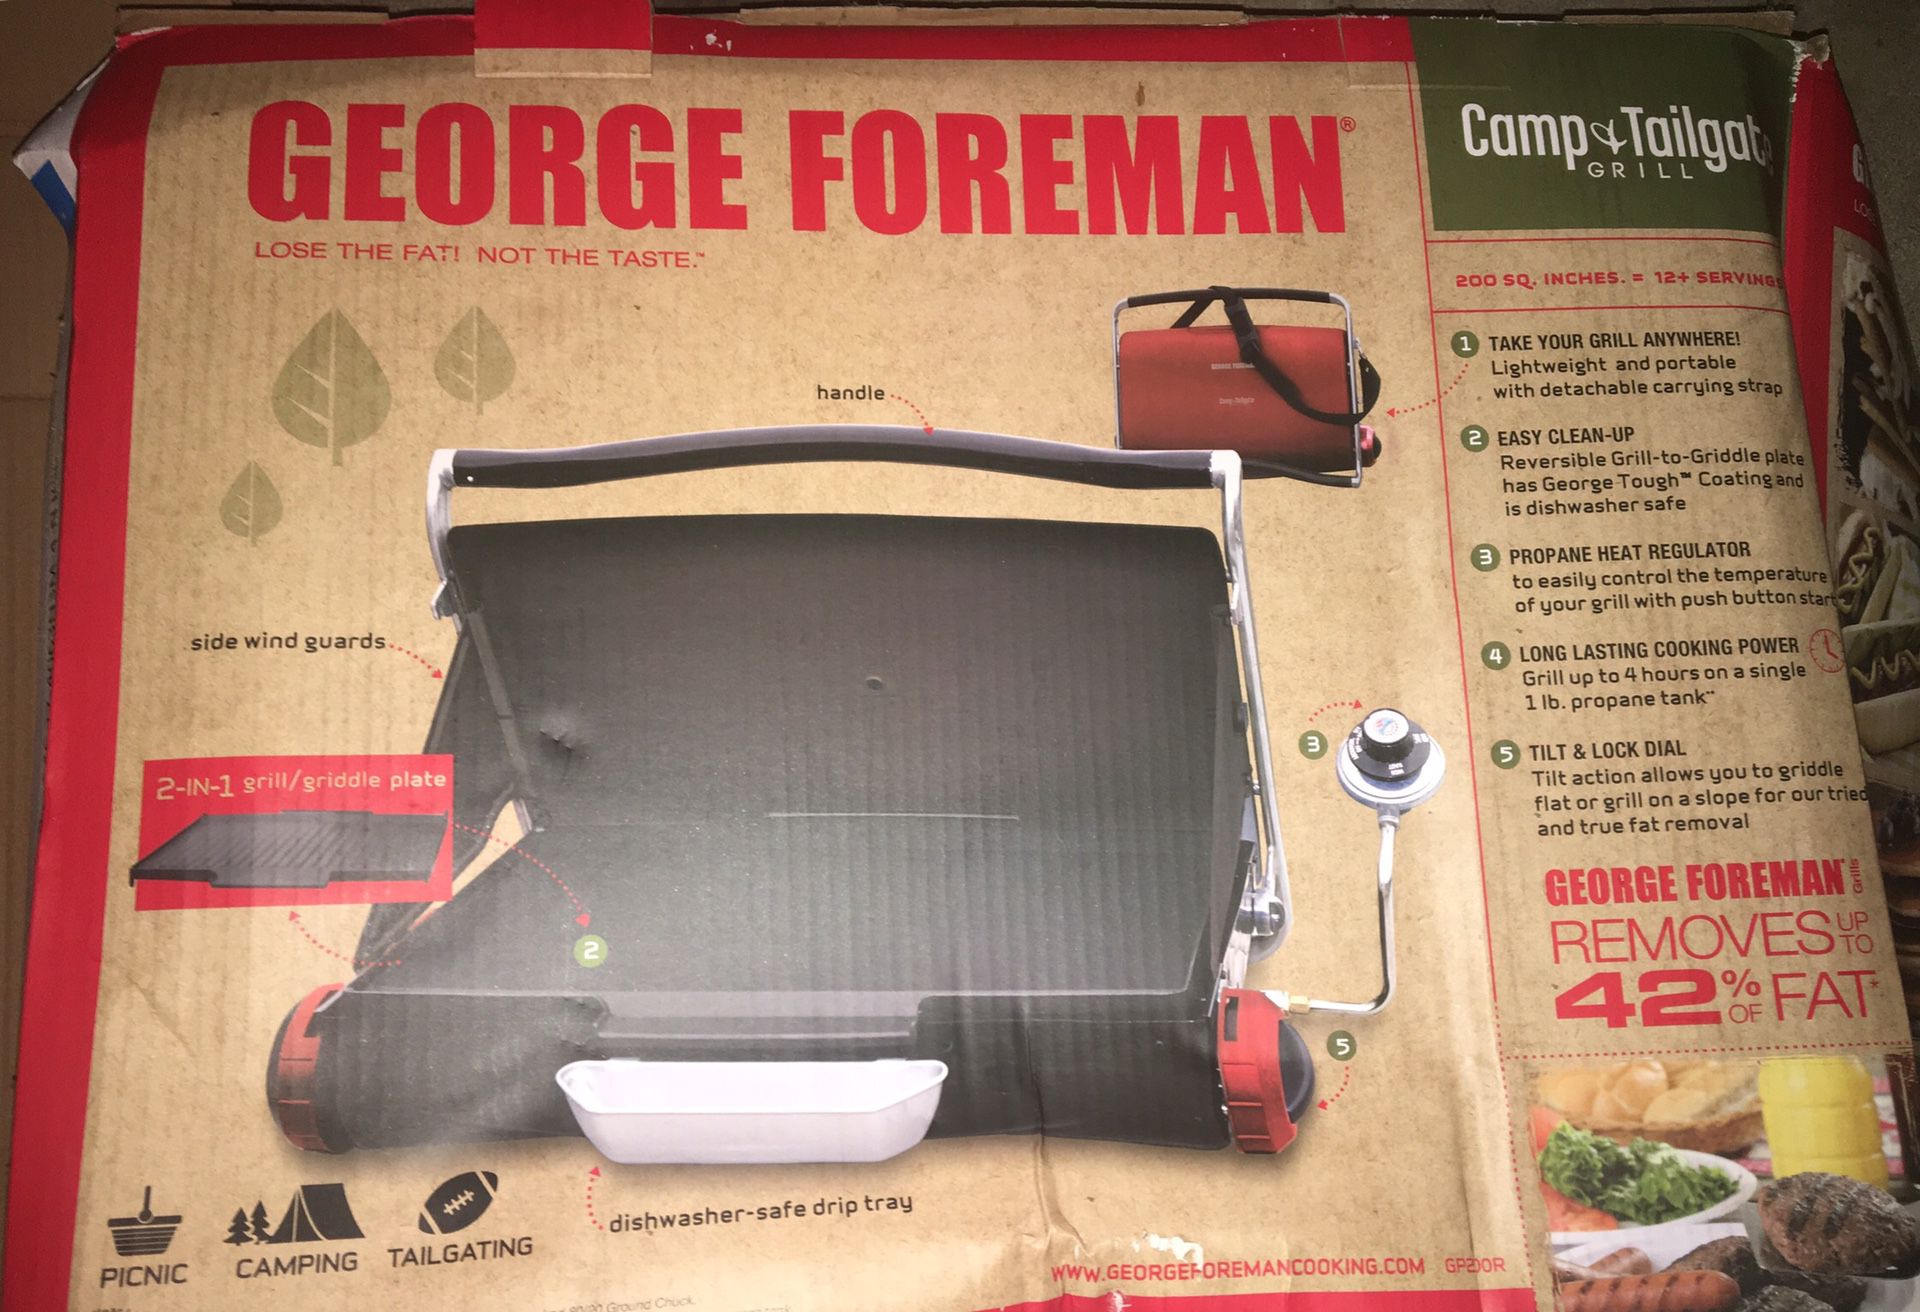 George Foreman Portable Camp and Tailgate Grill